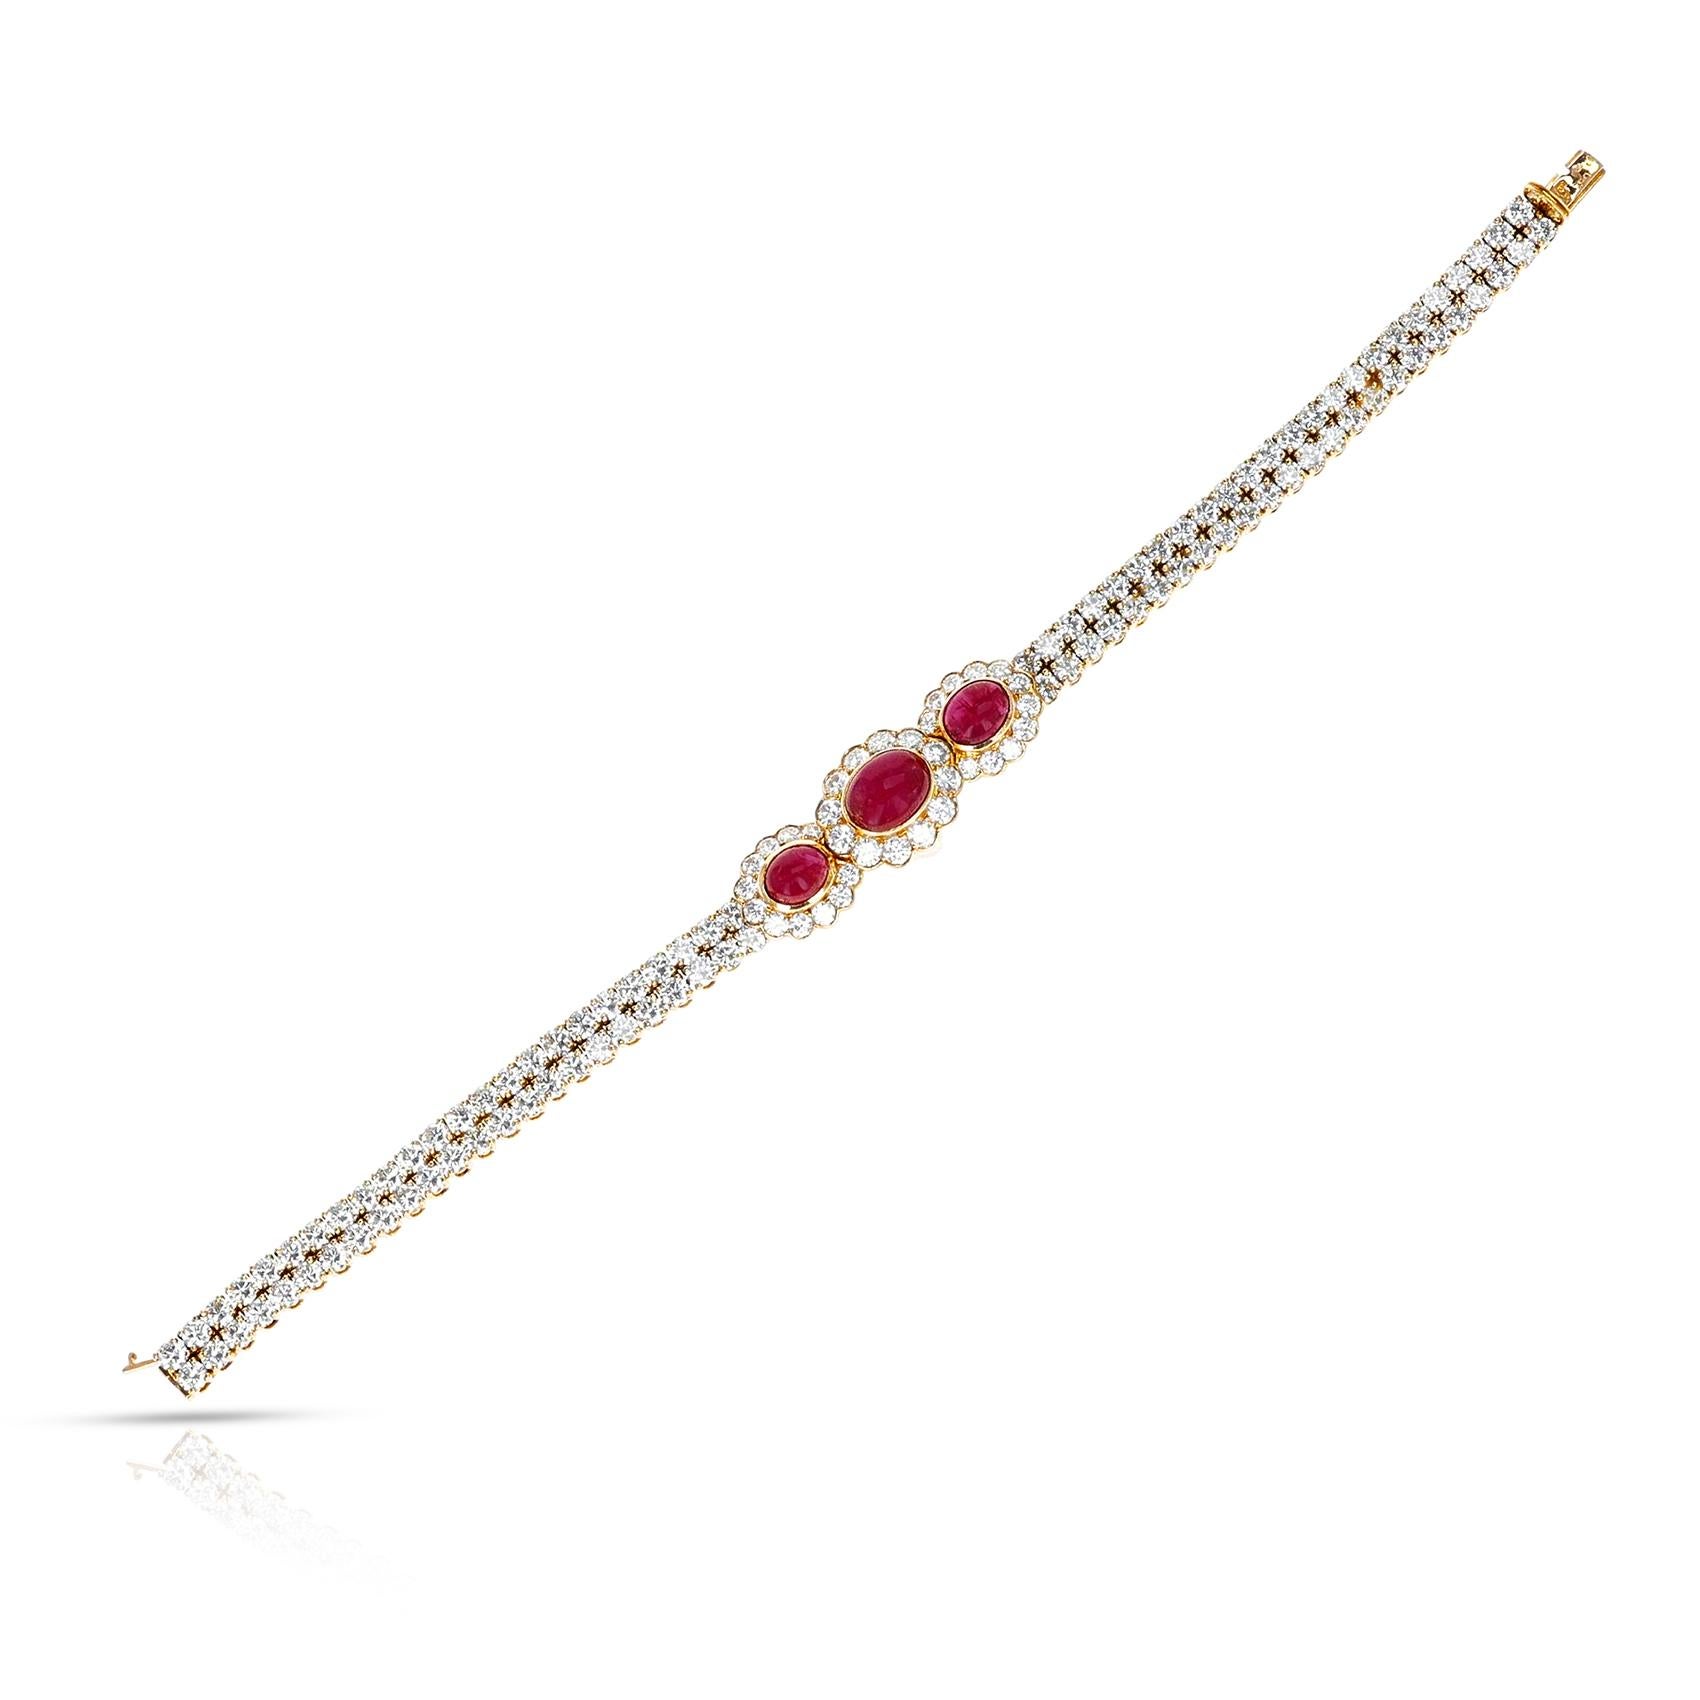 Van Cleef & Arpels Ruby Cabochon and Diamond Bracelet and Necklace Set, 18k For Sale 7